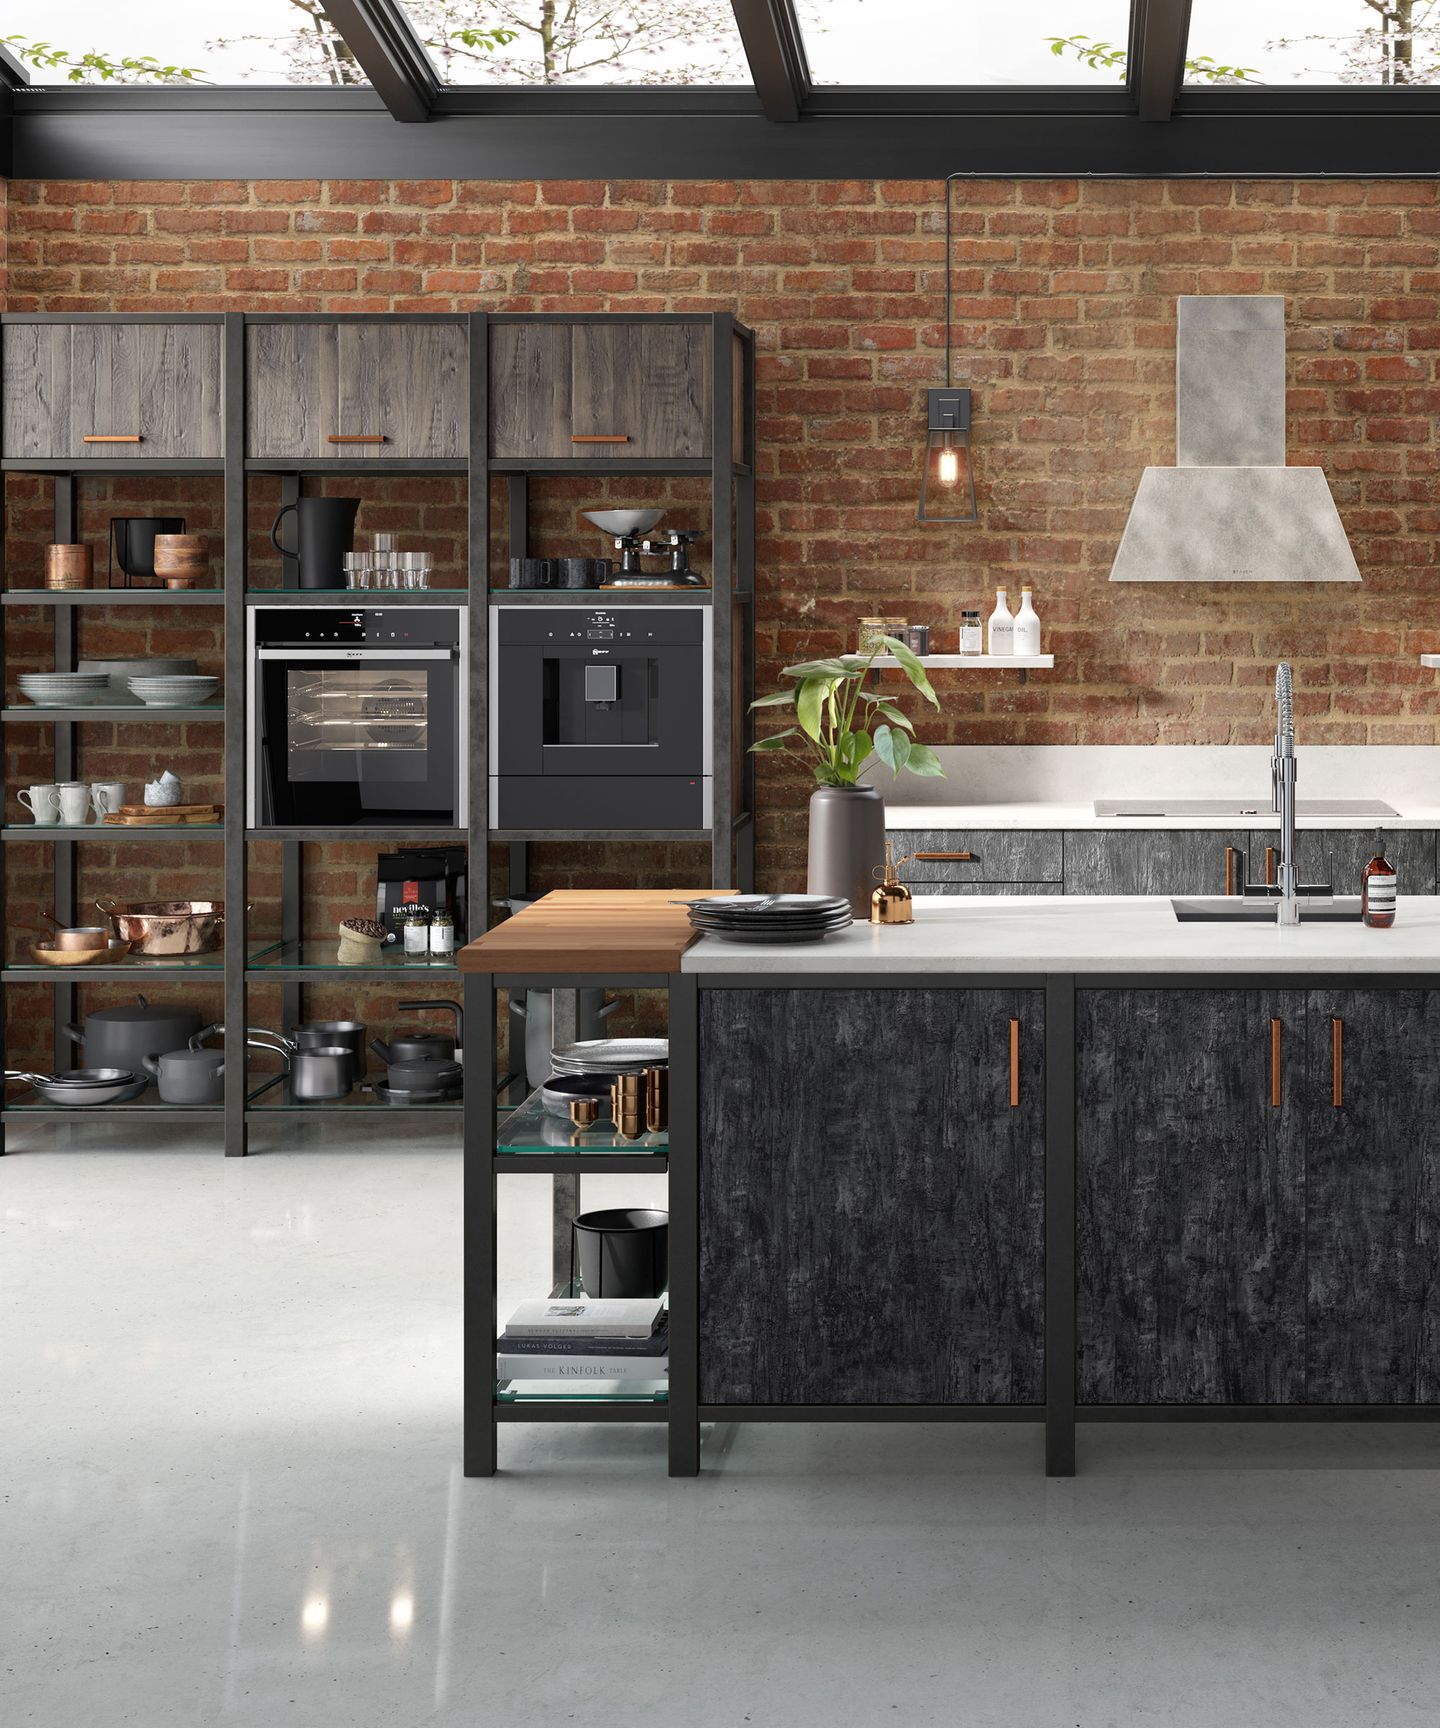 How to design a modern kitchen – tips and tricks from the experts